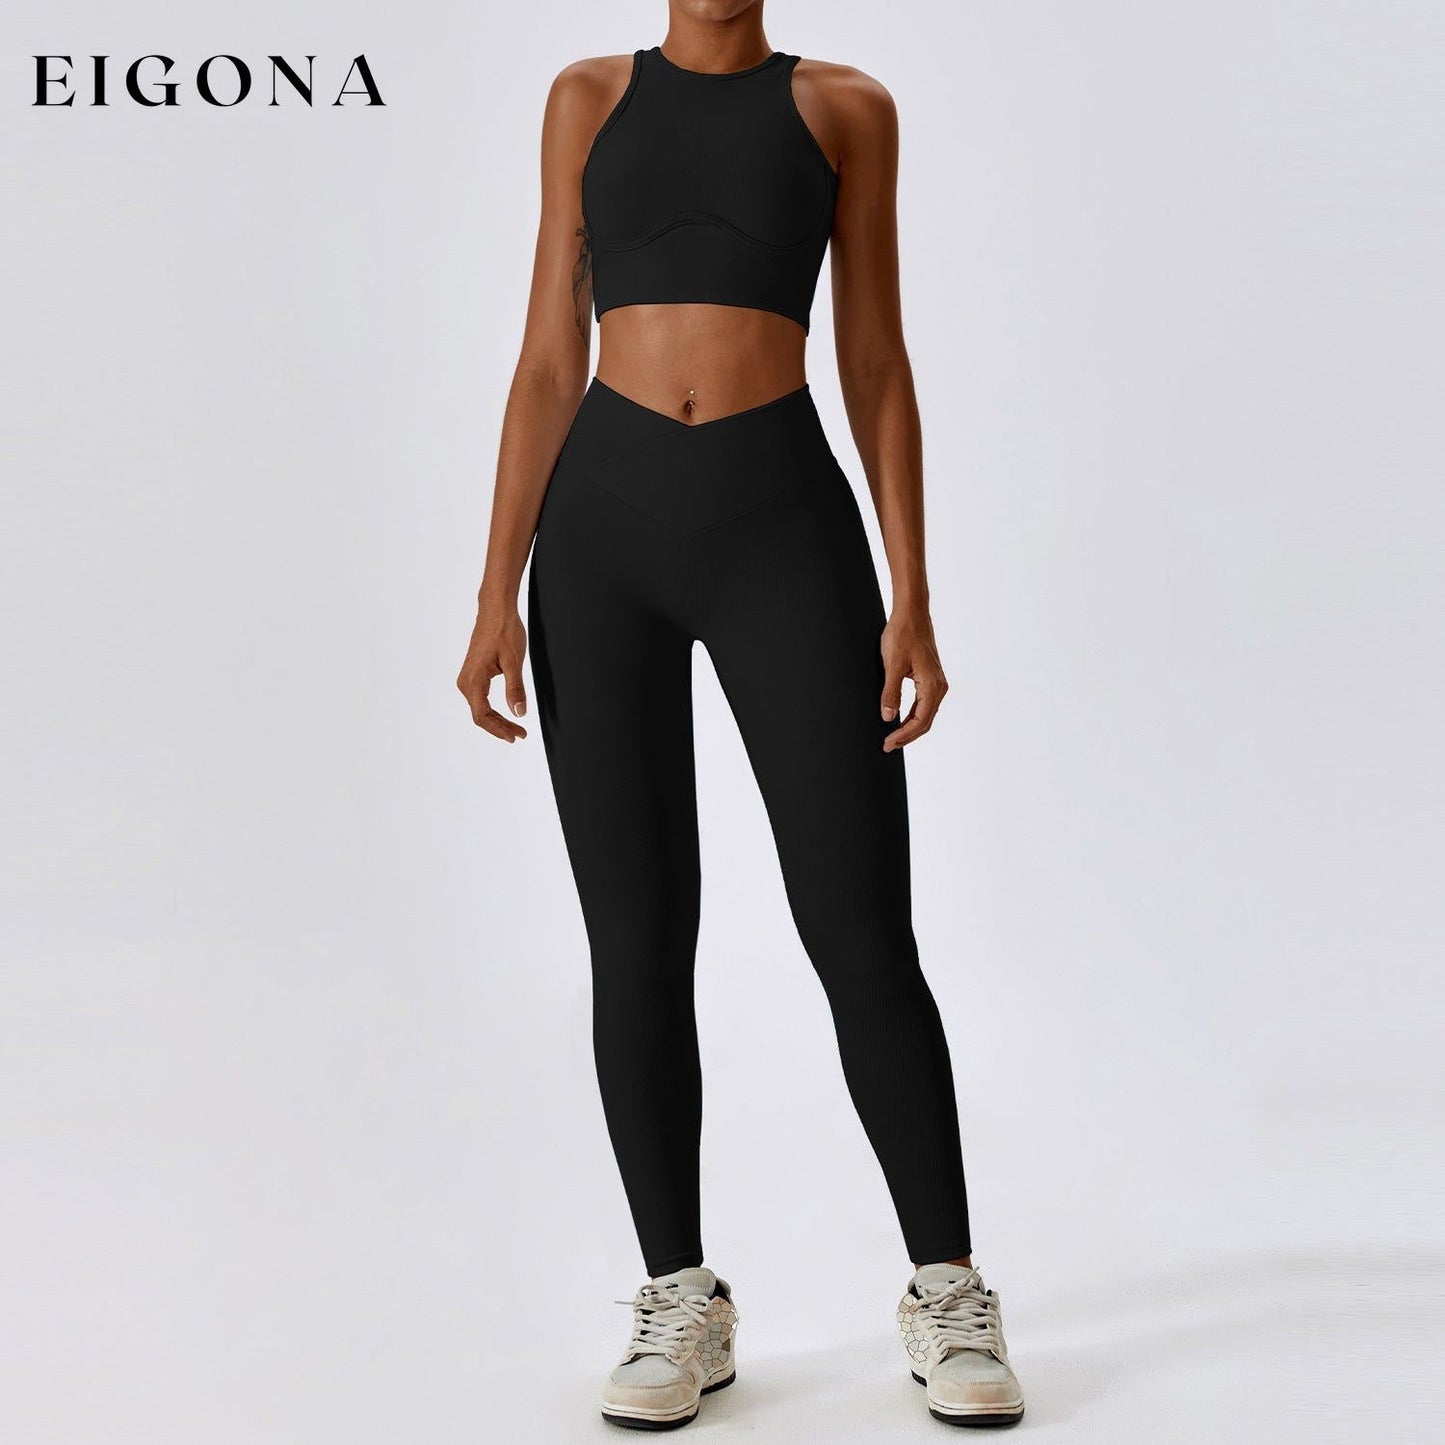 Thread Abdominal Shaping High Waist Beauty Back Yoga Suit Quick Drying Push up Hip Raise Skinny Workout Exercise Outfit -2 Bra Trousers High-Grade Black 2 piece activewear clothes set workout